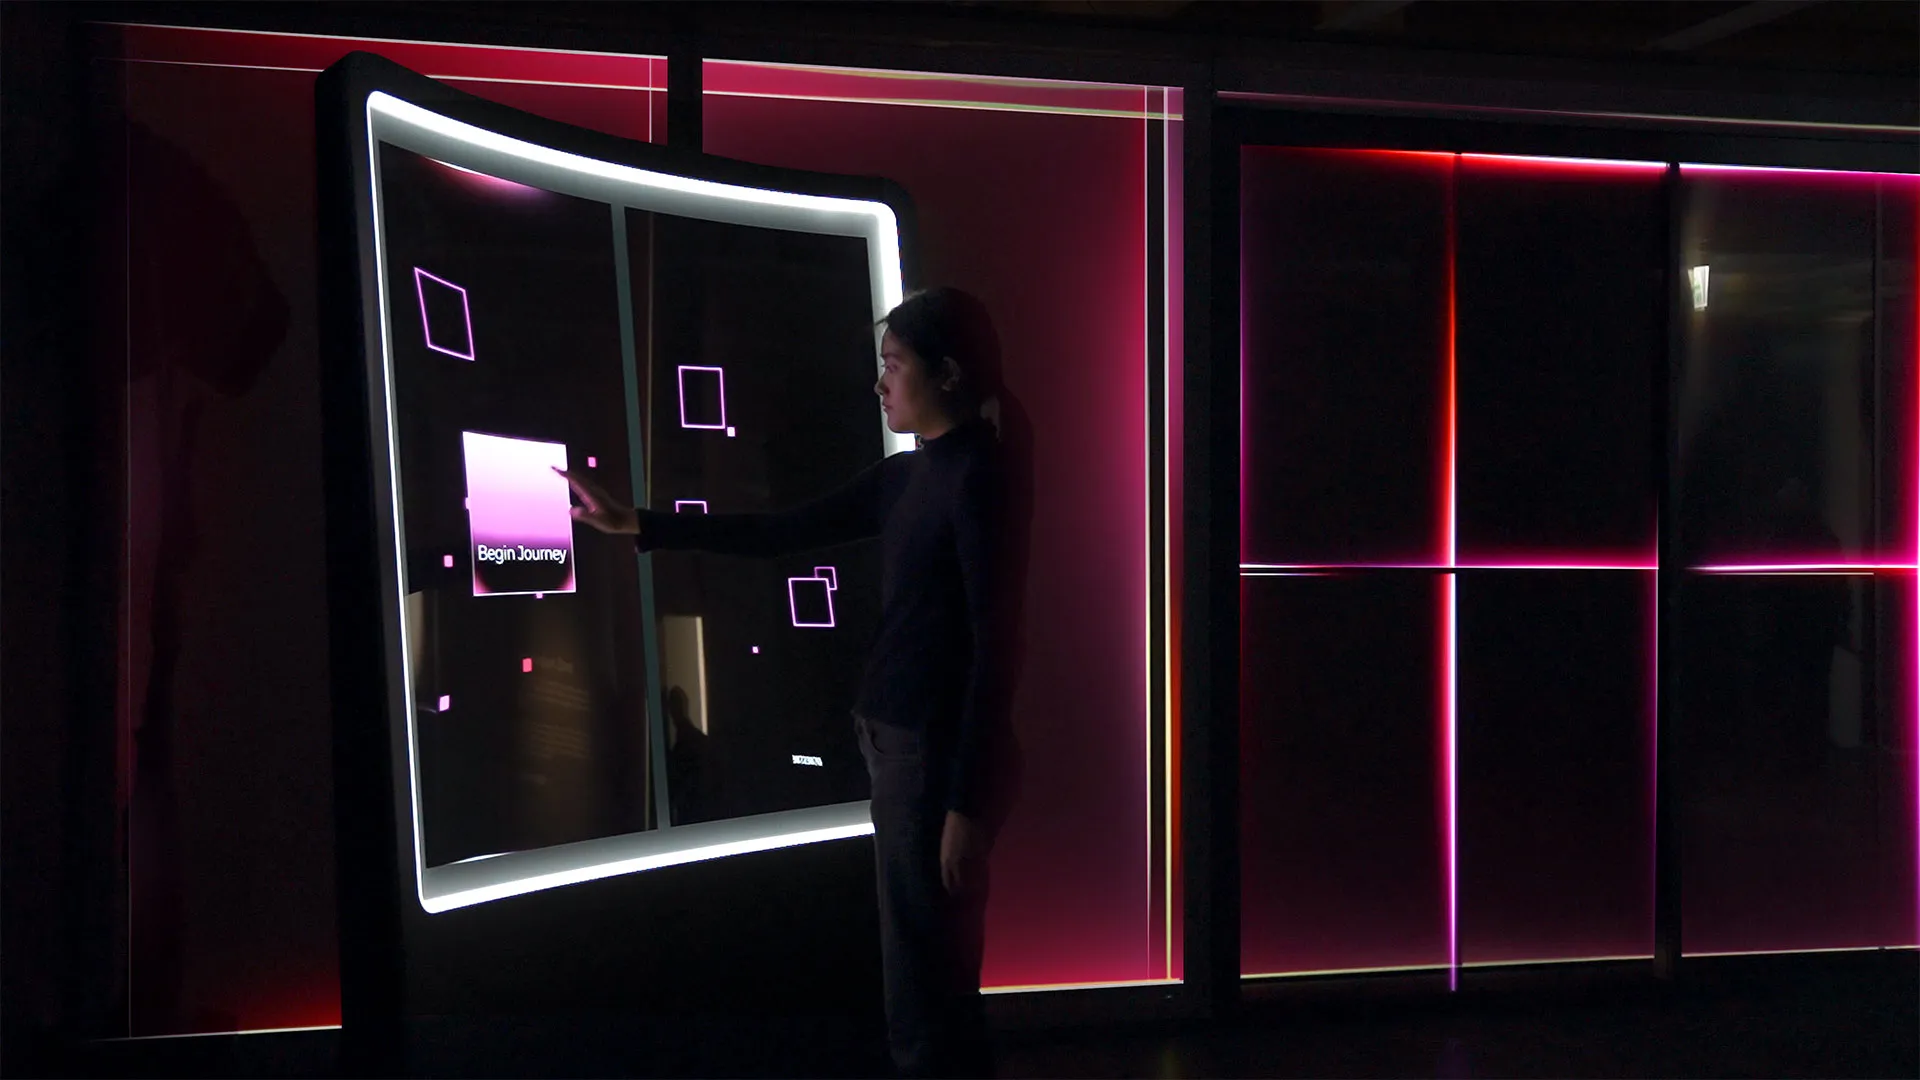 a dark room with a large interactive transparent led screen with woman interacting. begin journey text is displayed onscreen